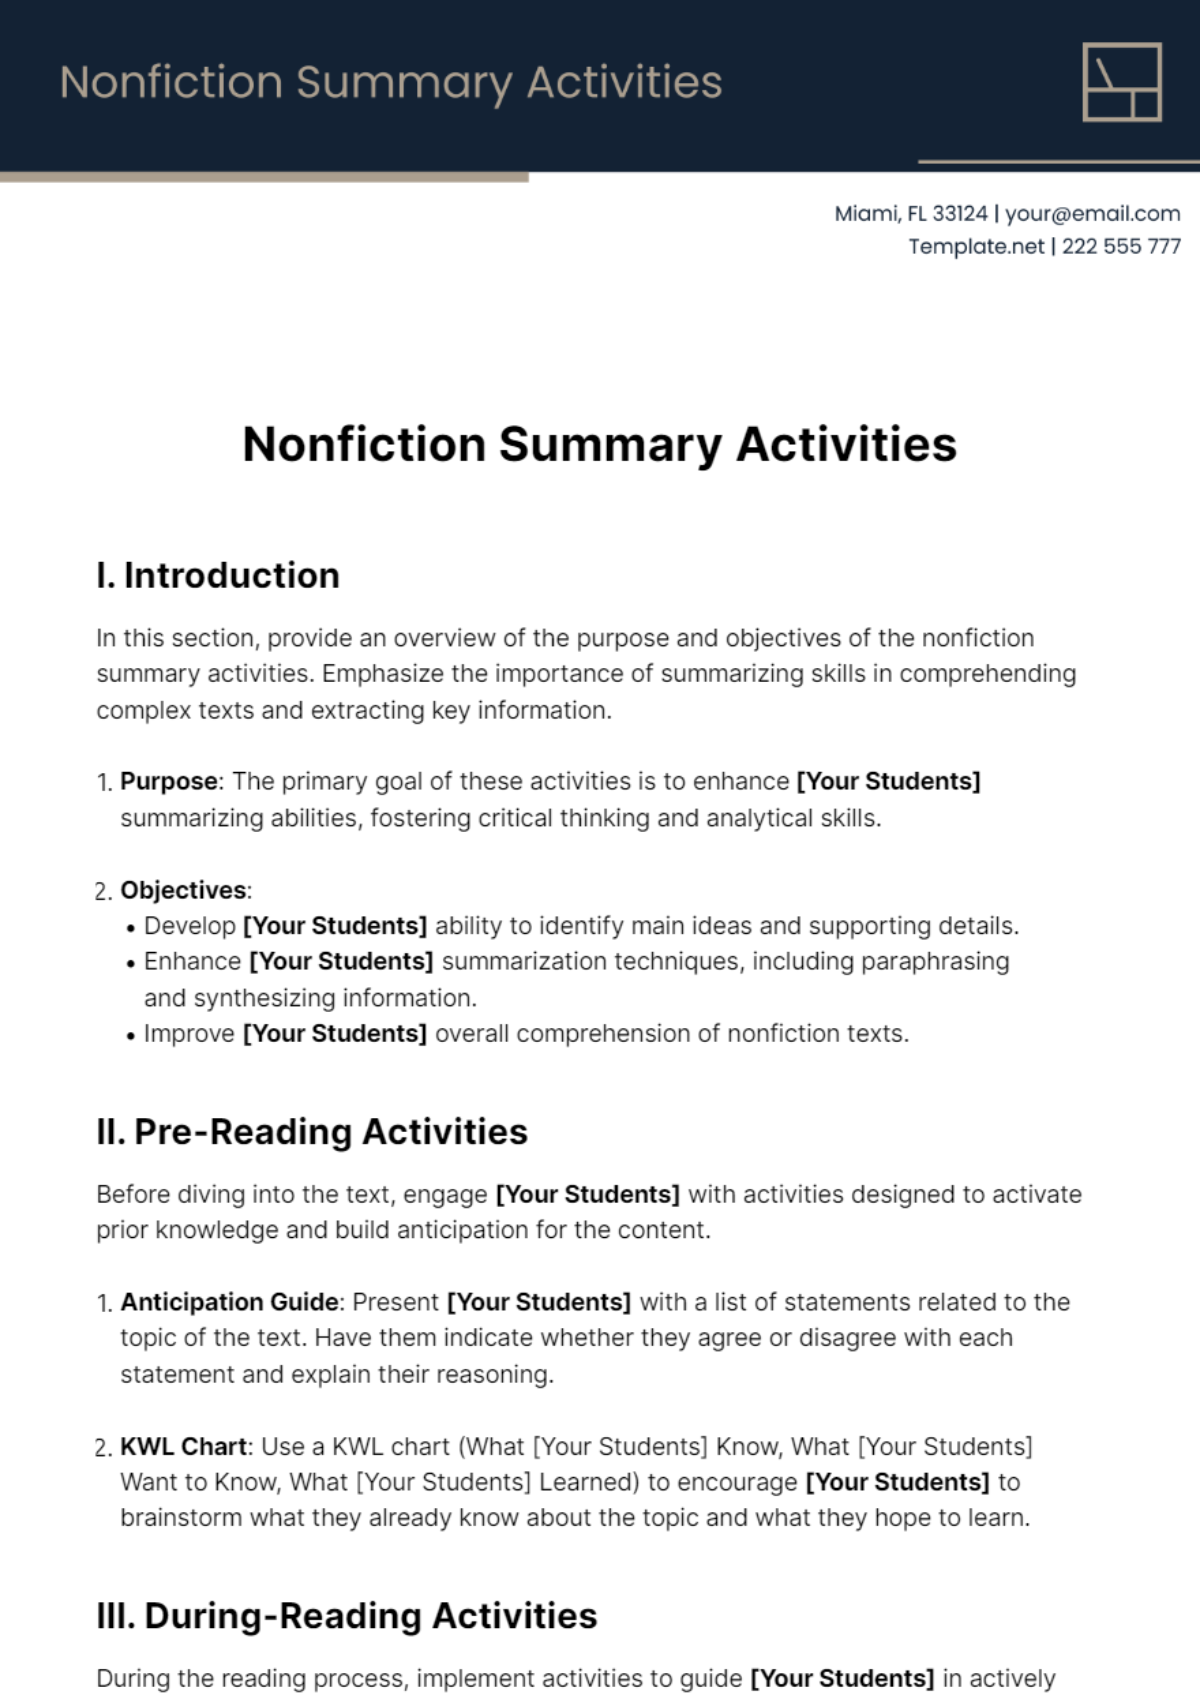 Free Nonfiction Summary Activities Template